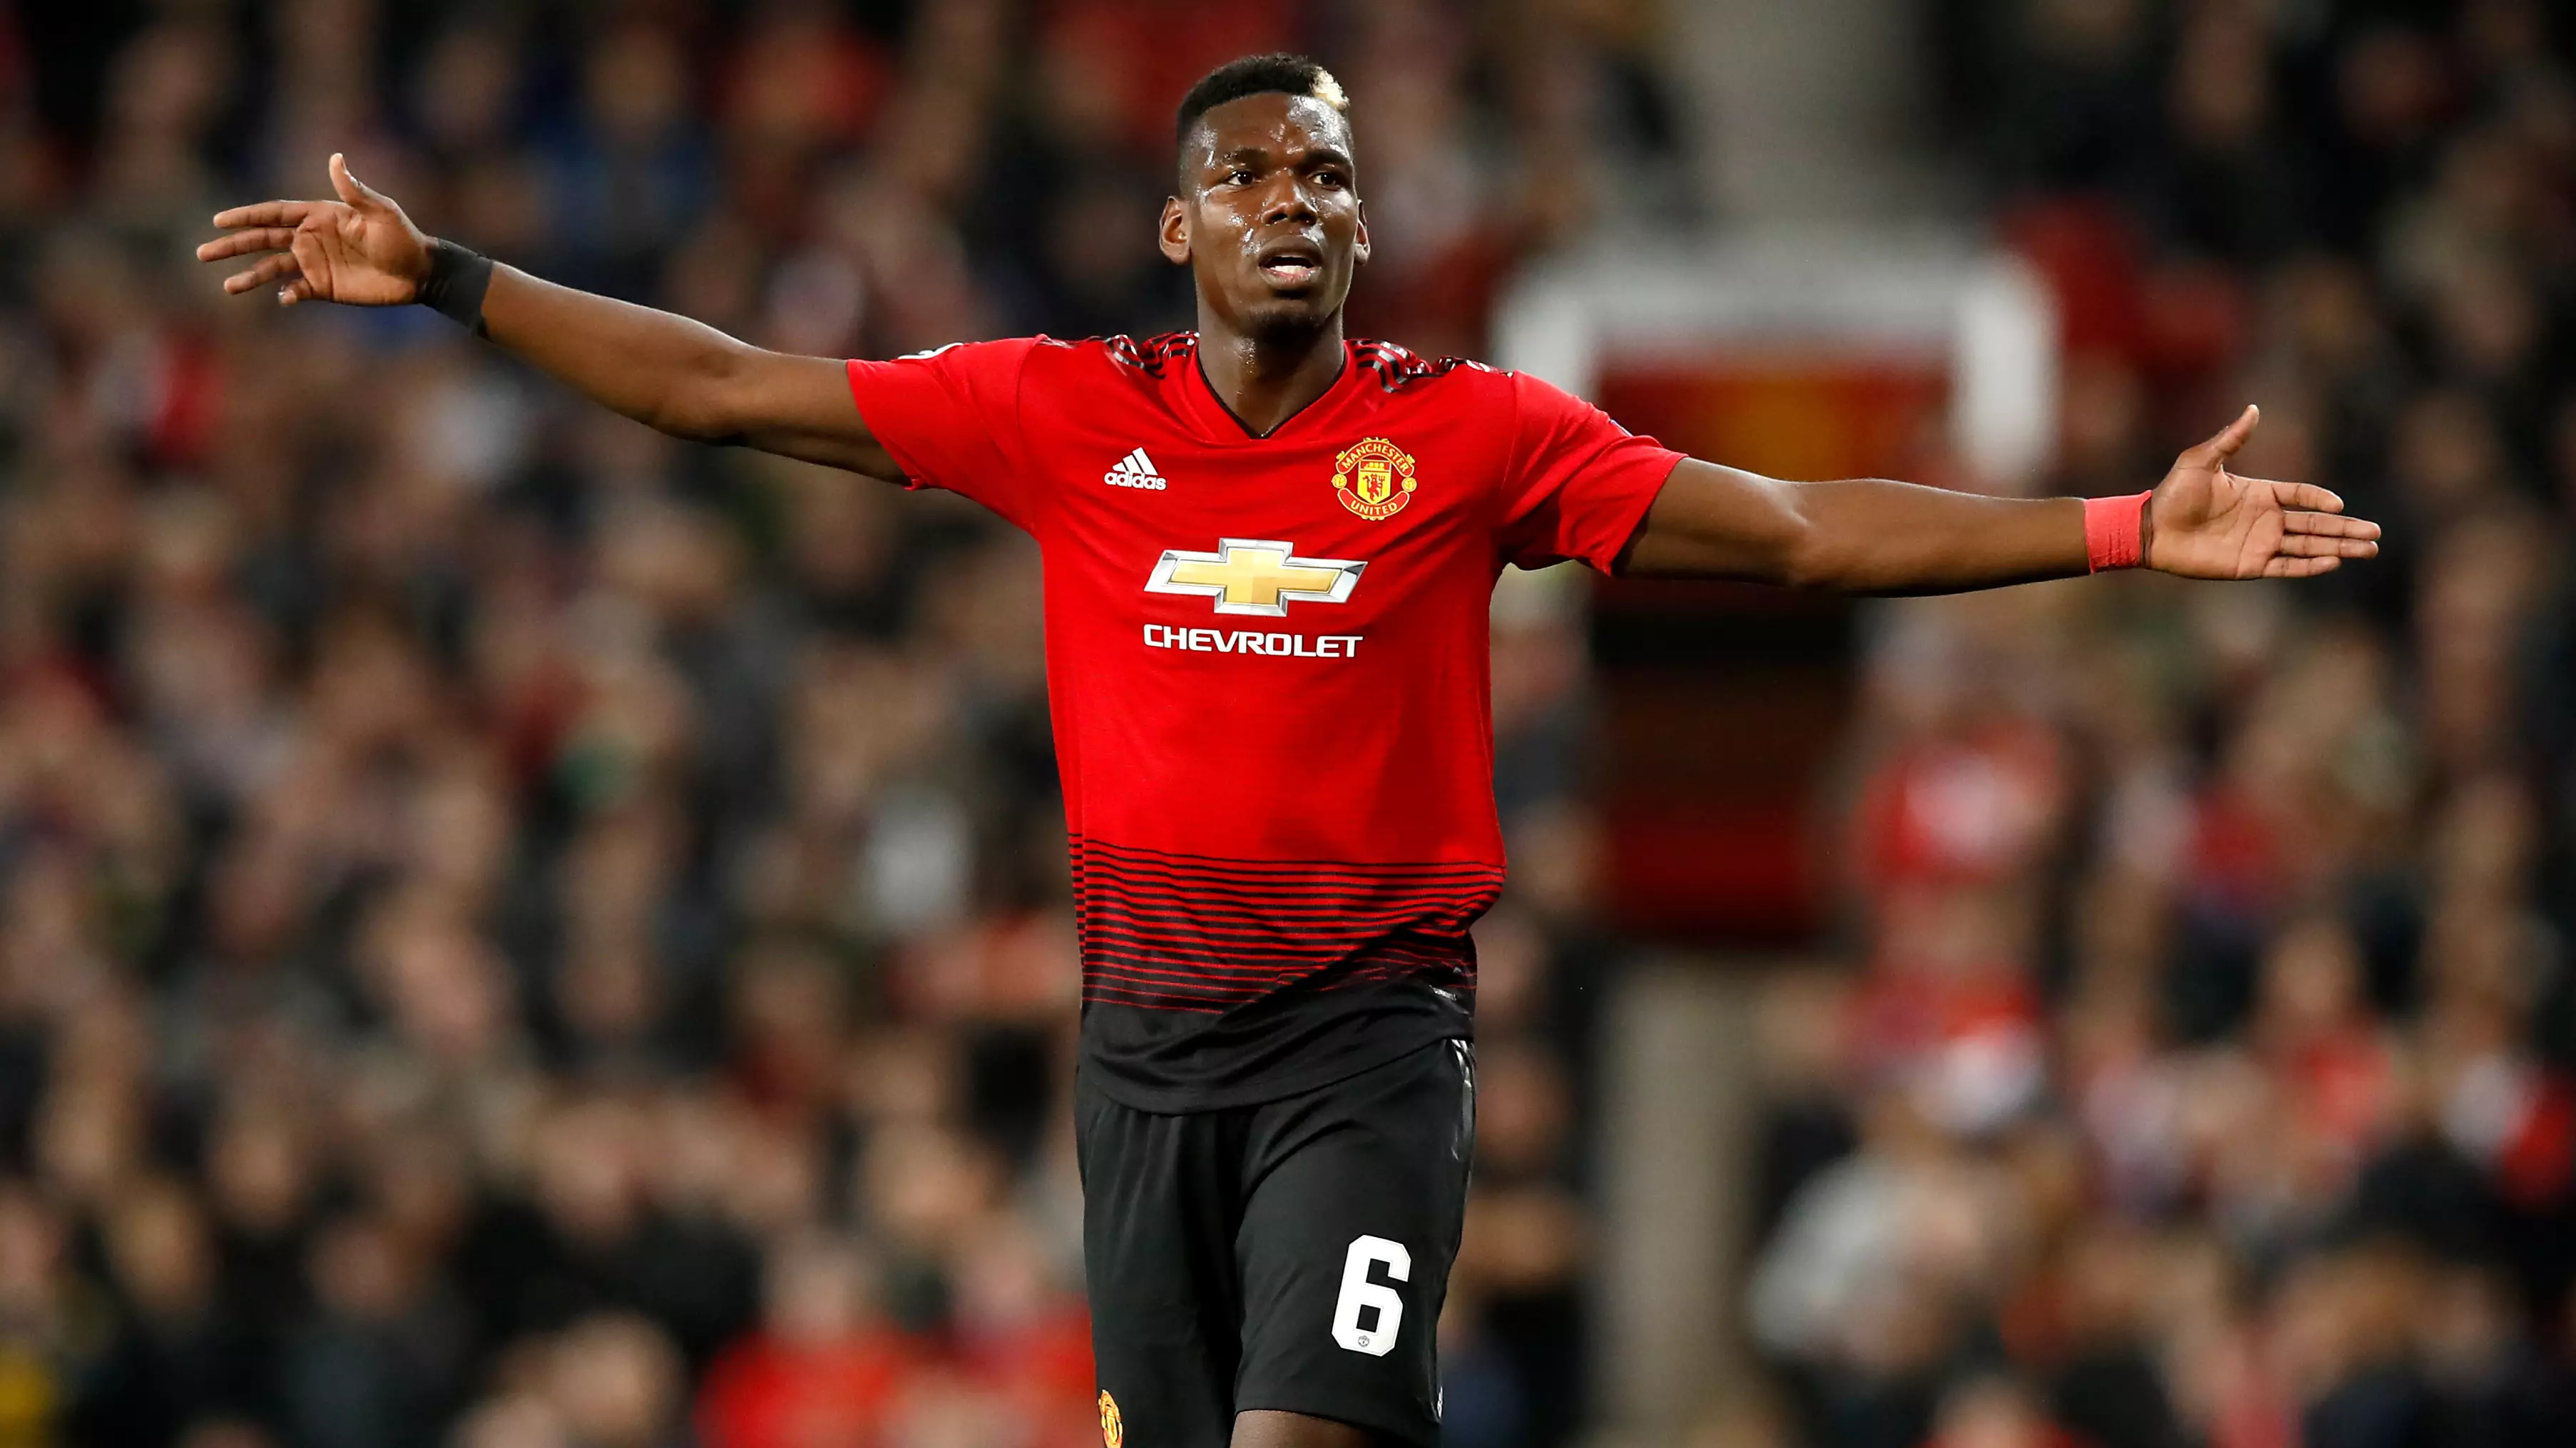 Paul Pogba Has Been Banned From Speaking To The Media After Latest Comments